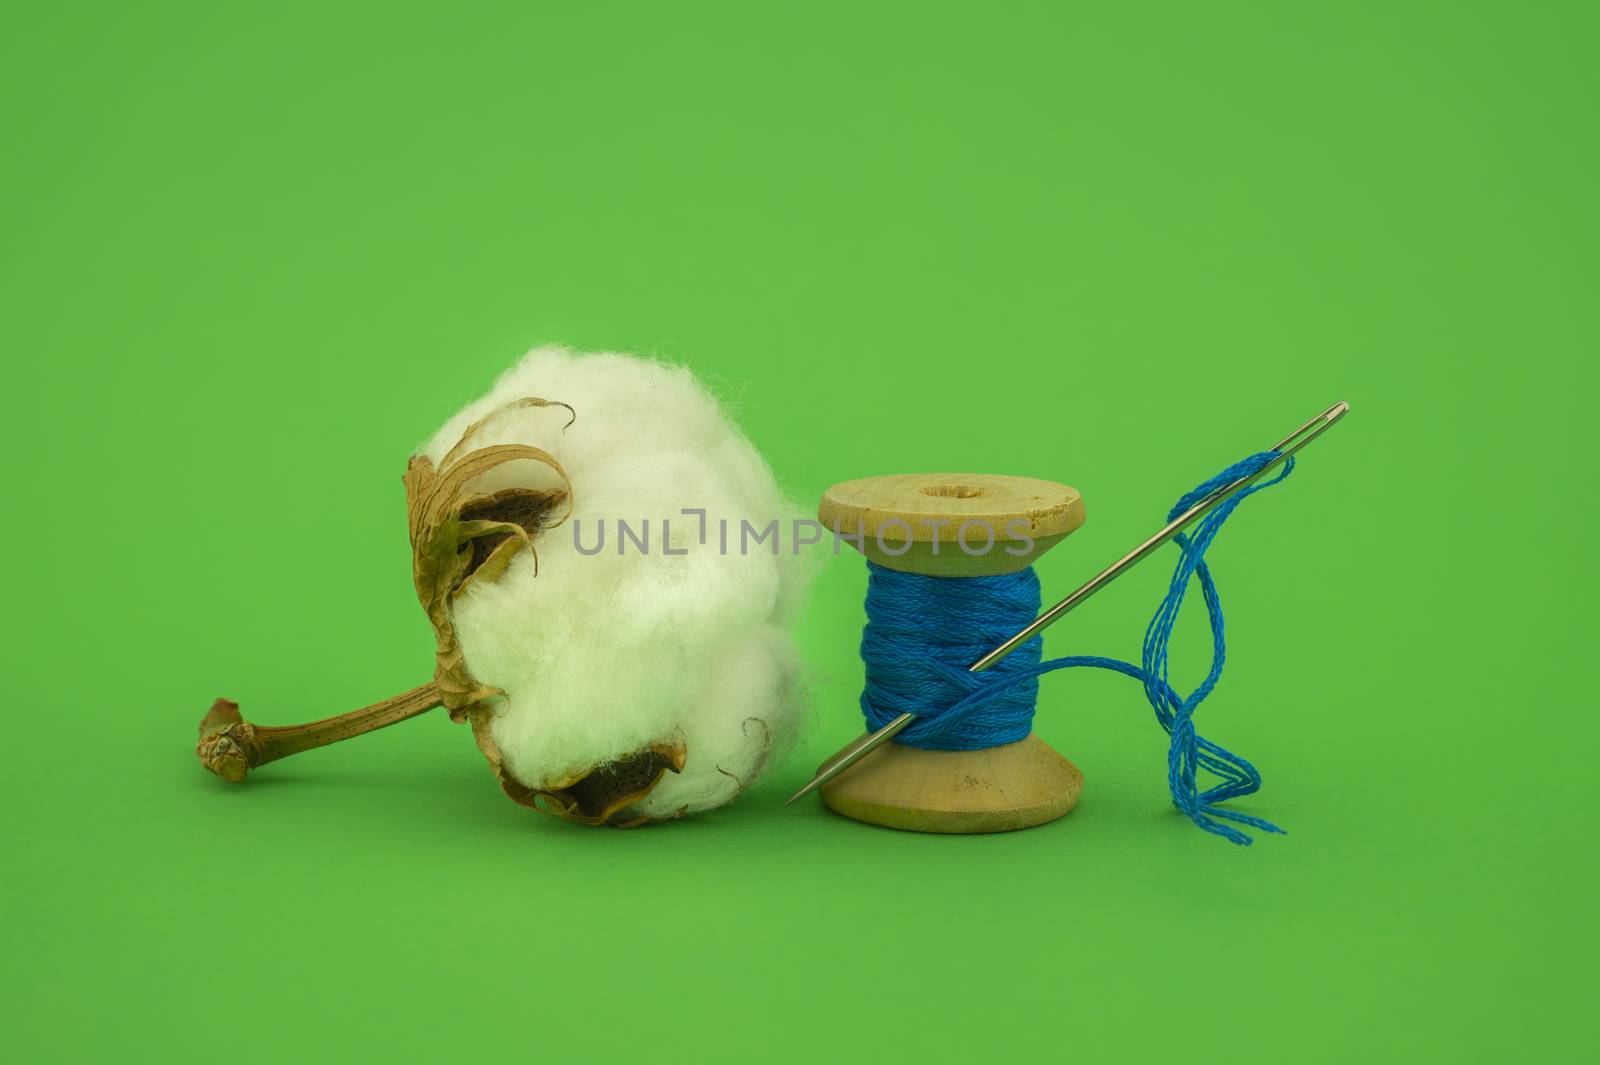 Cotton boll with natural cotton and reel of bright yarn over a green background with copy space, concept of production of natural resources